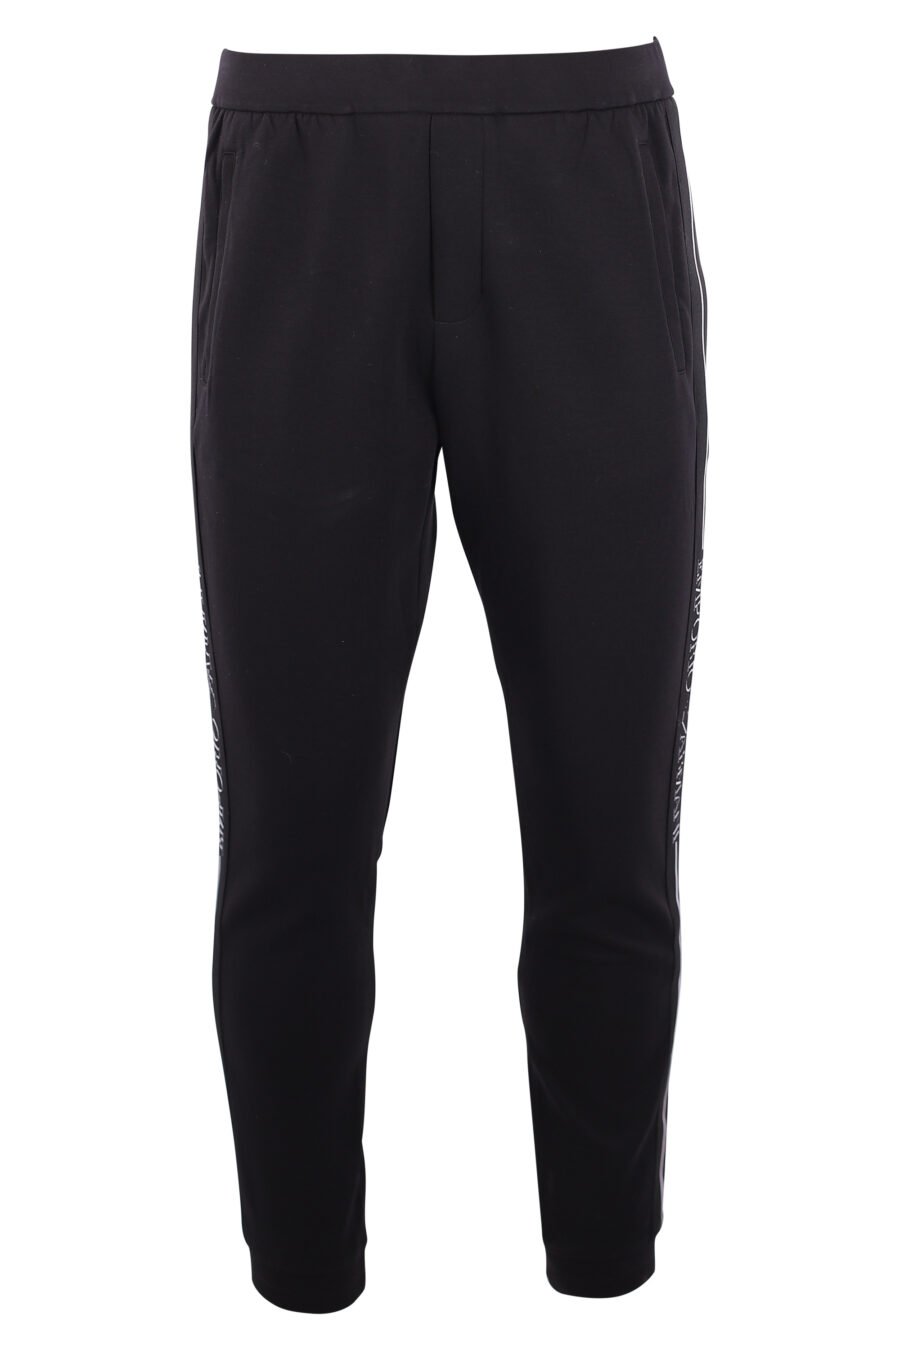 Tracksuit bottoms black with vertical side logo - IMG 3165 copy